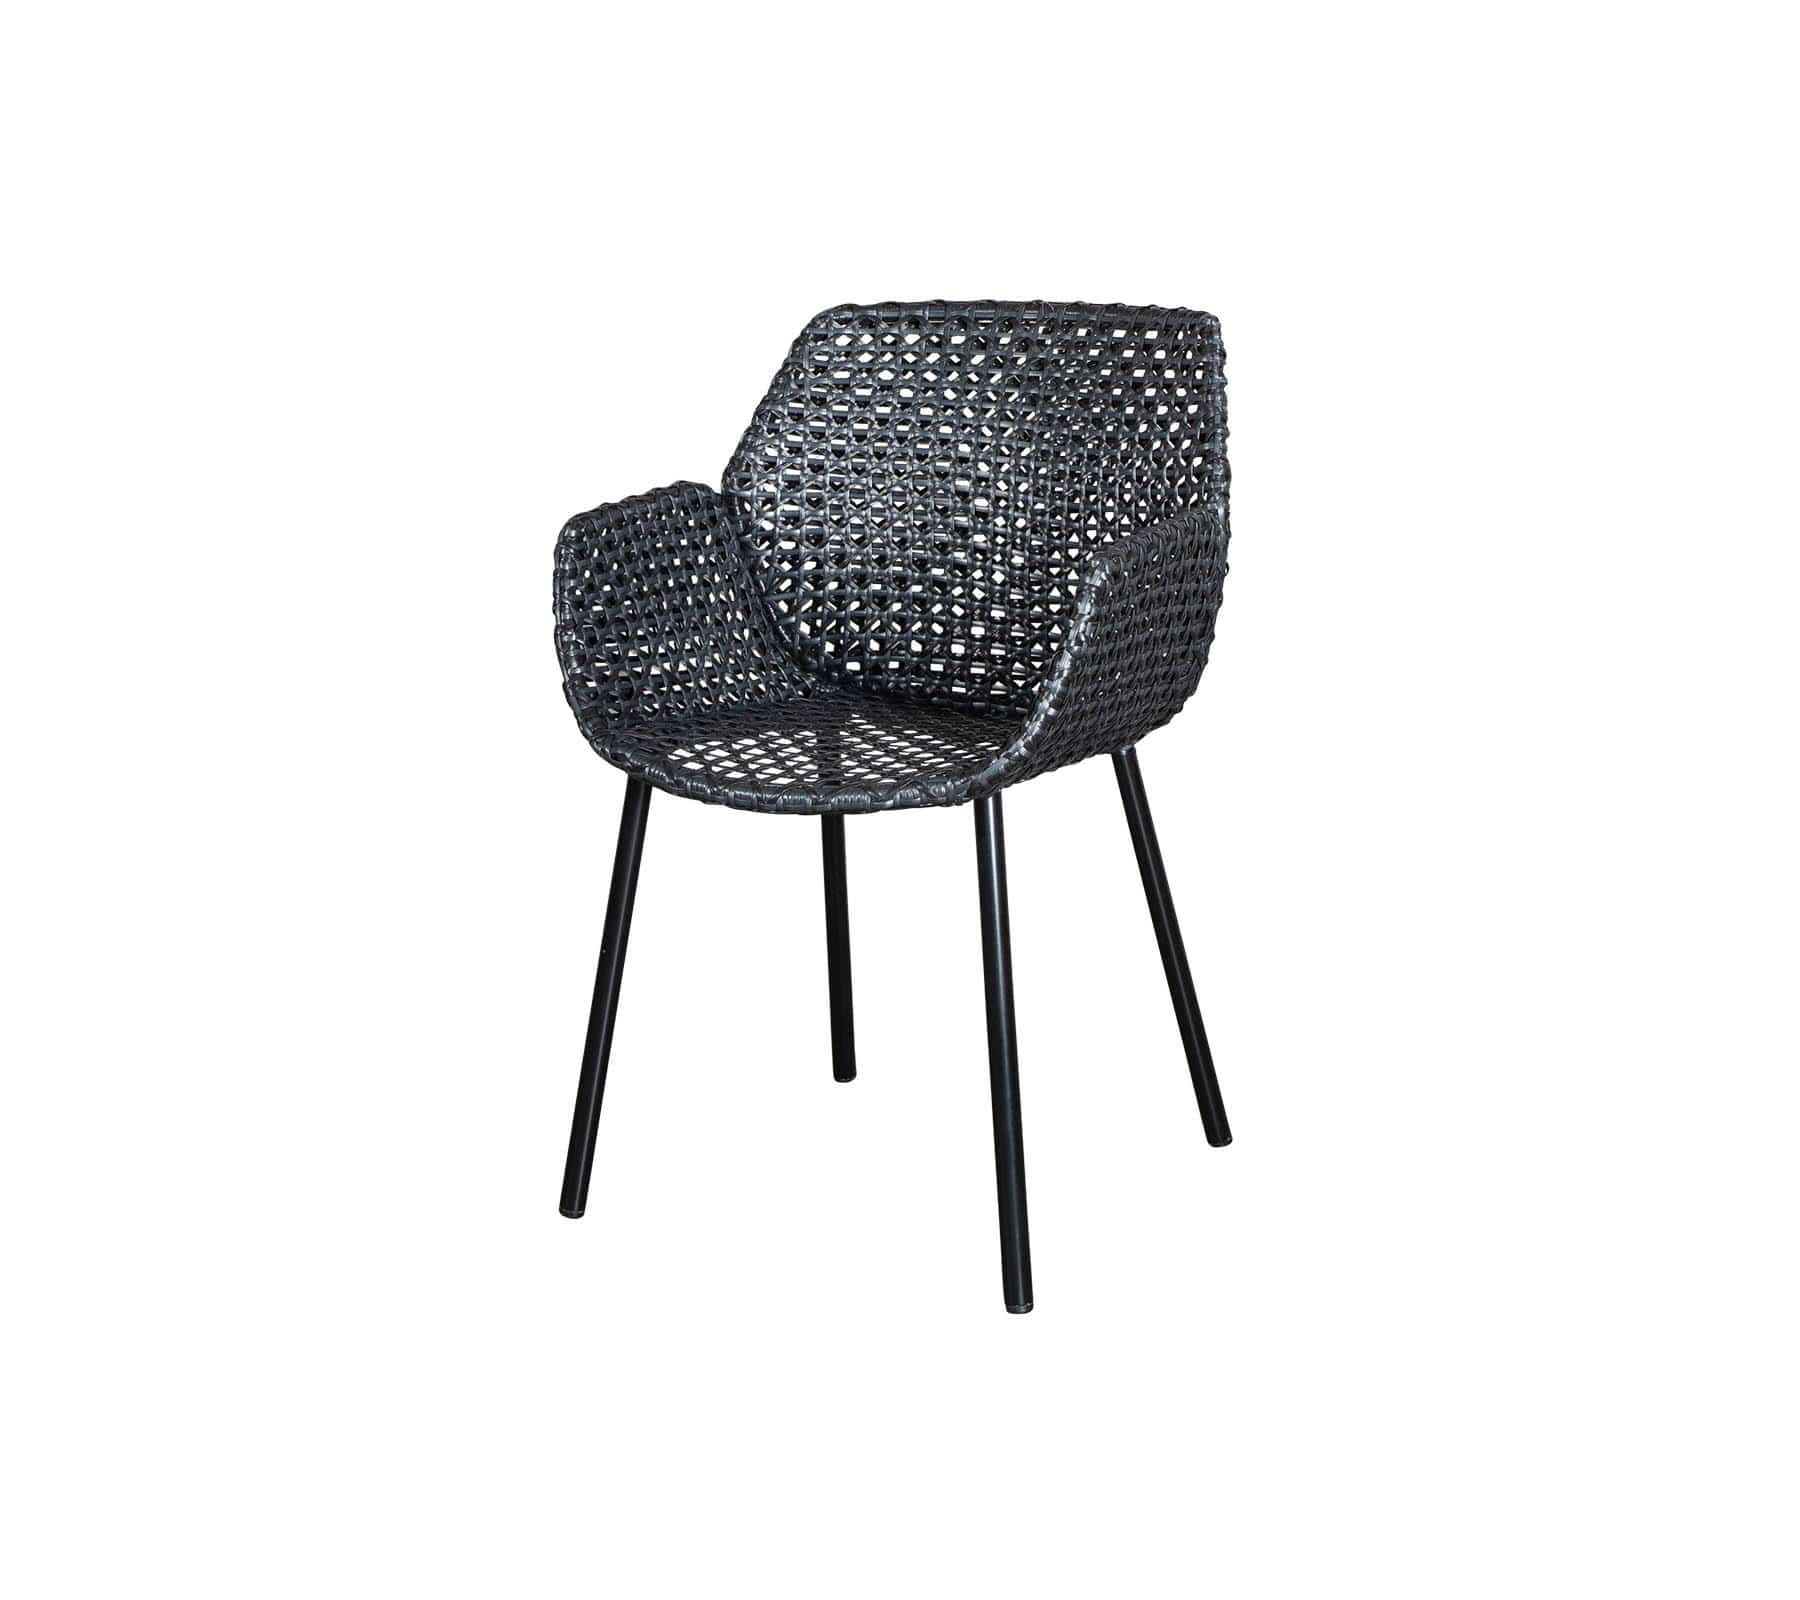  Boxhill's Vibe black outdoor armchair without cushion on white background